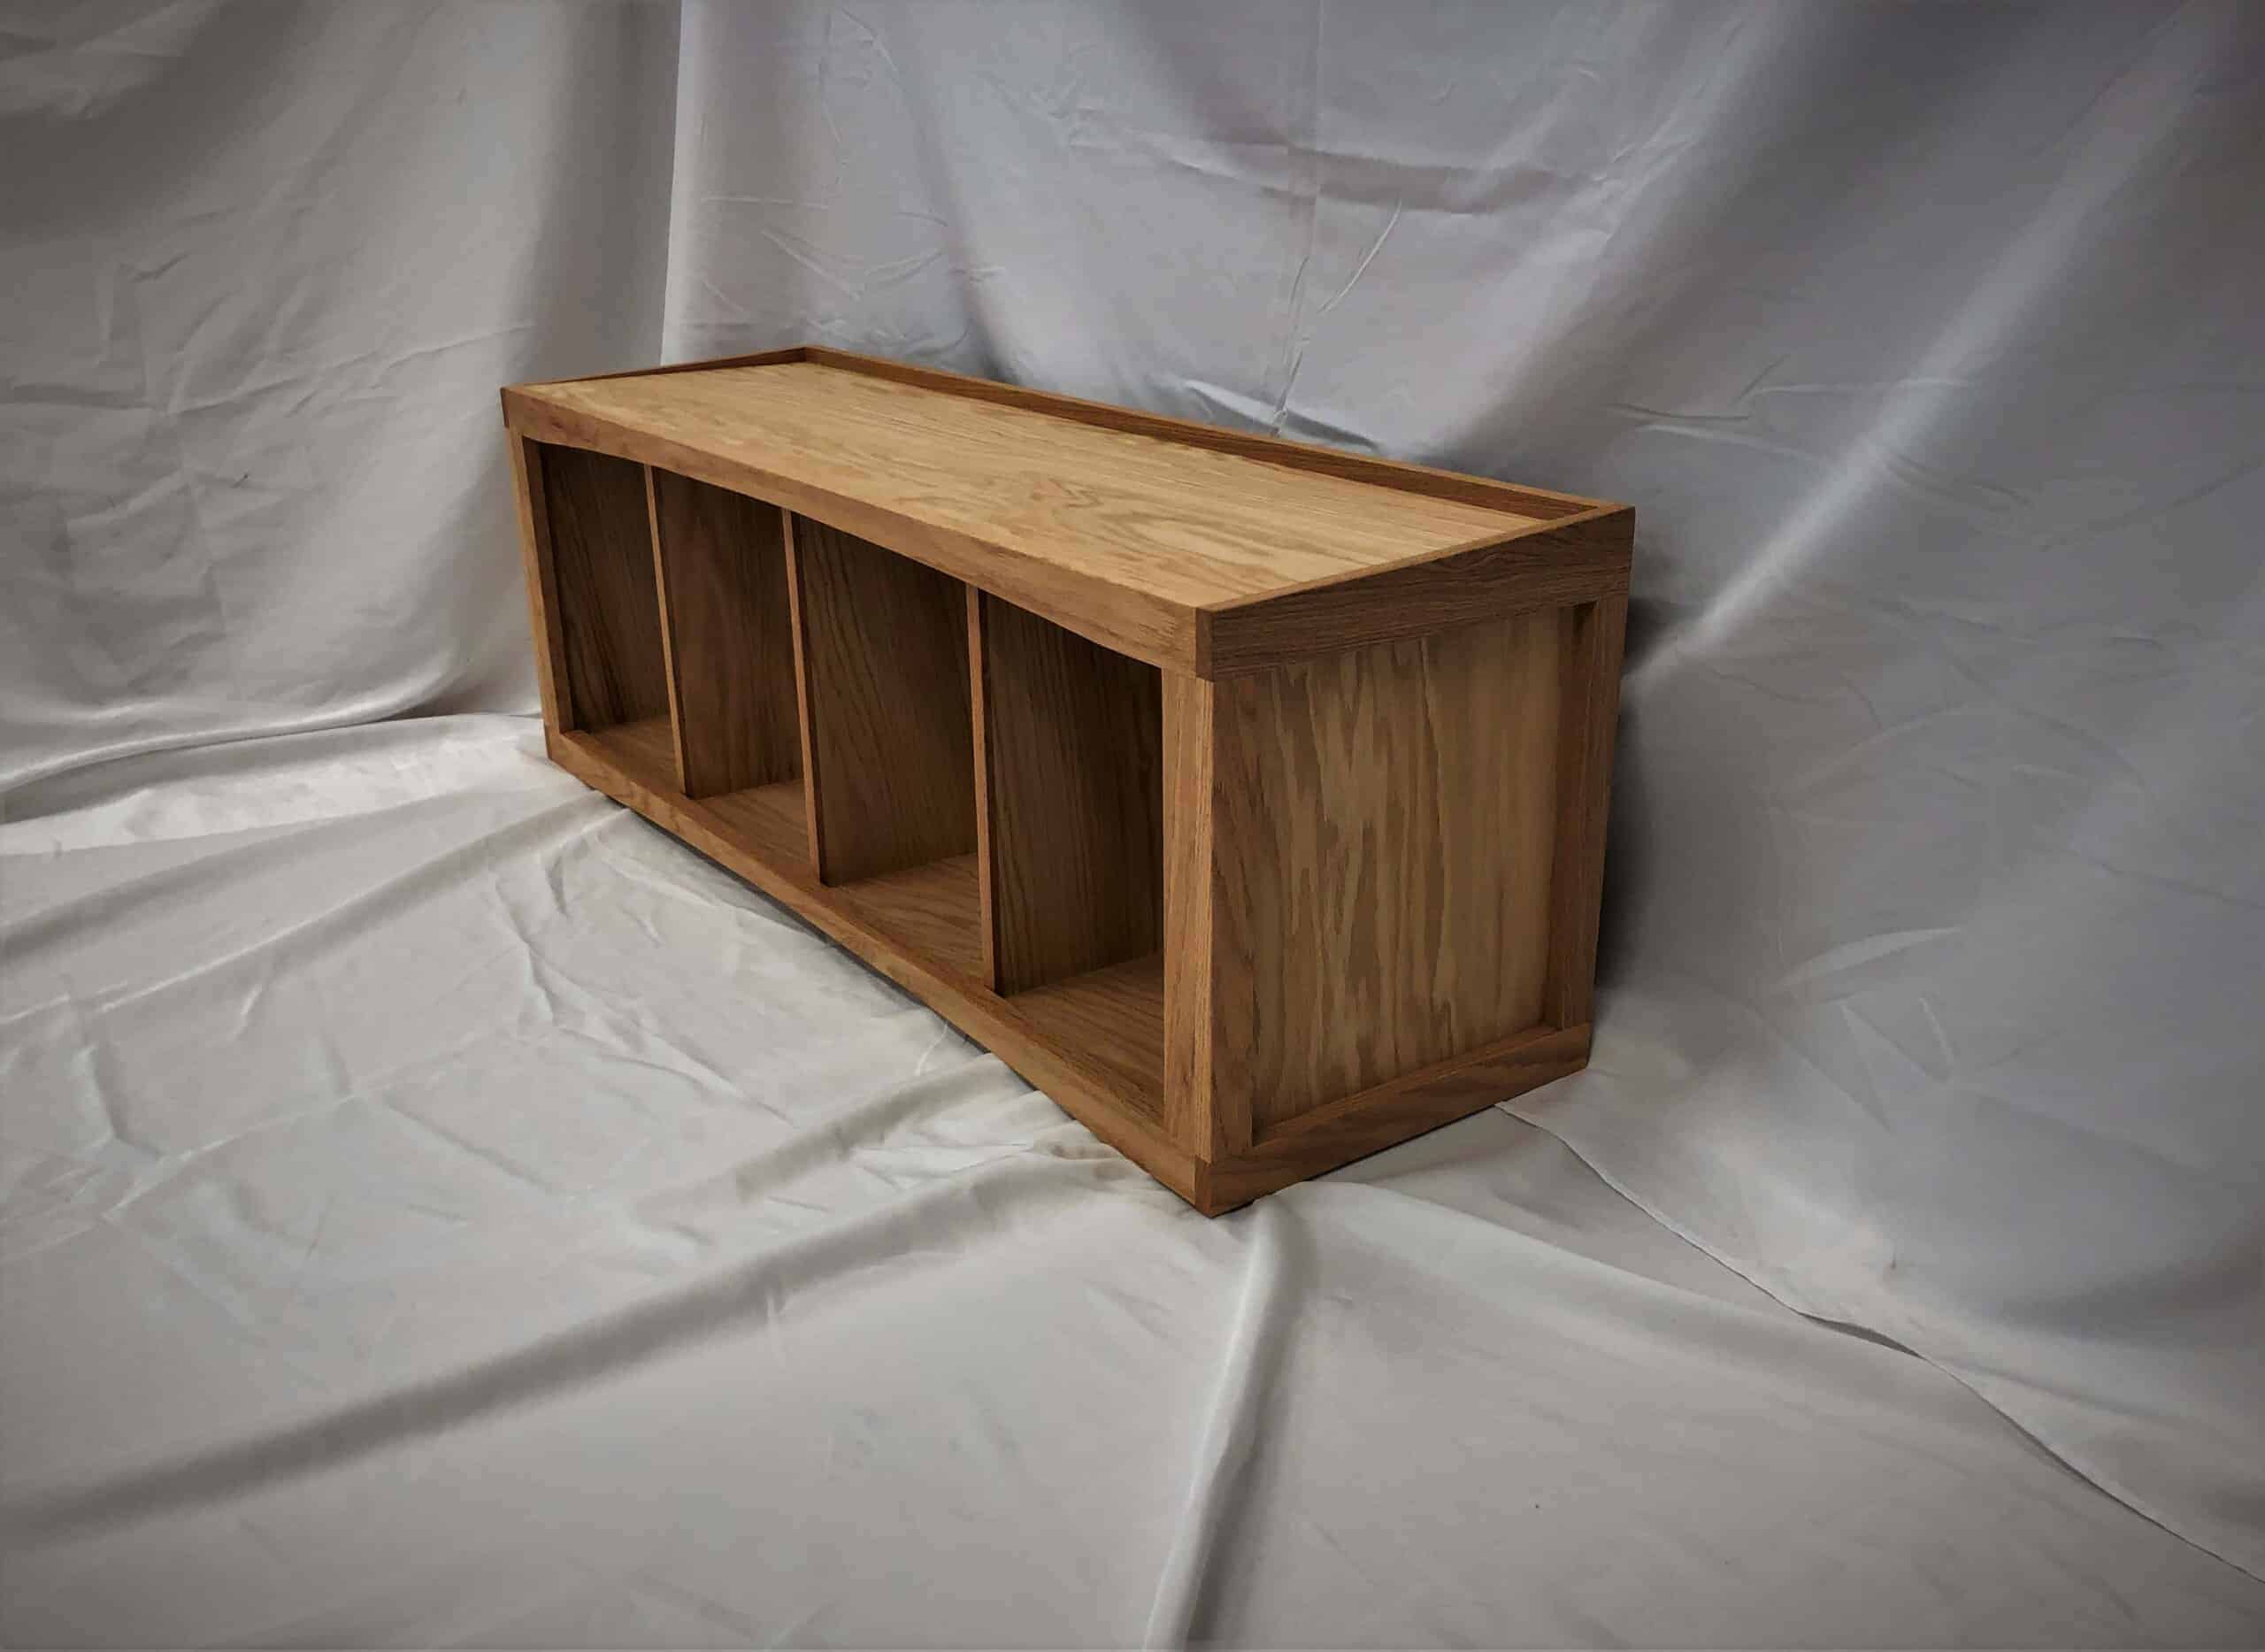 Featured image for “Red Oak Cubbie Bench”